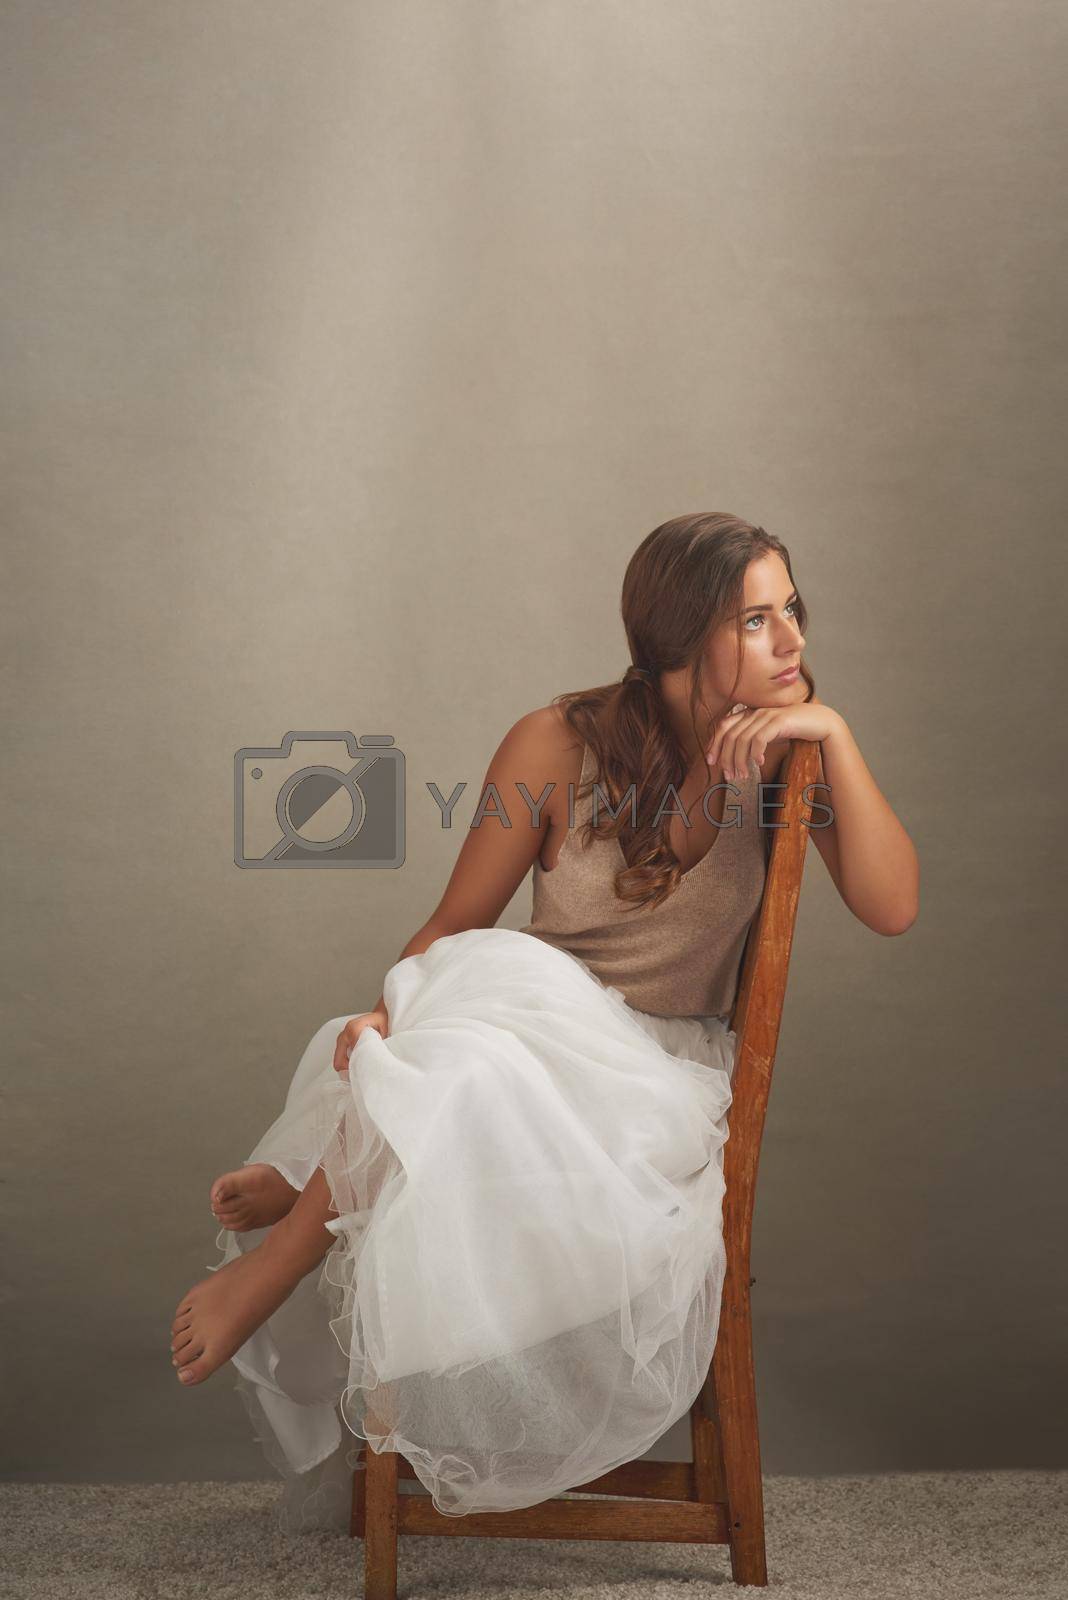 Studio shot of an attractive young woman looking thoughtful while sitting on a chair.